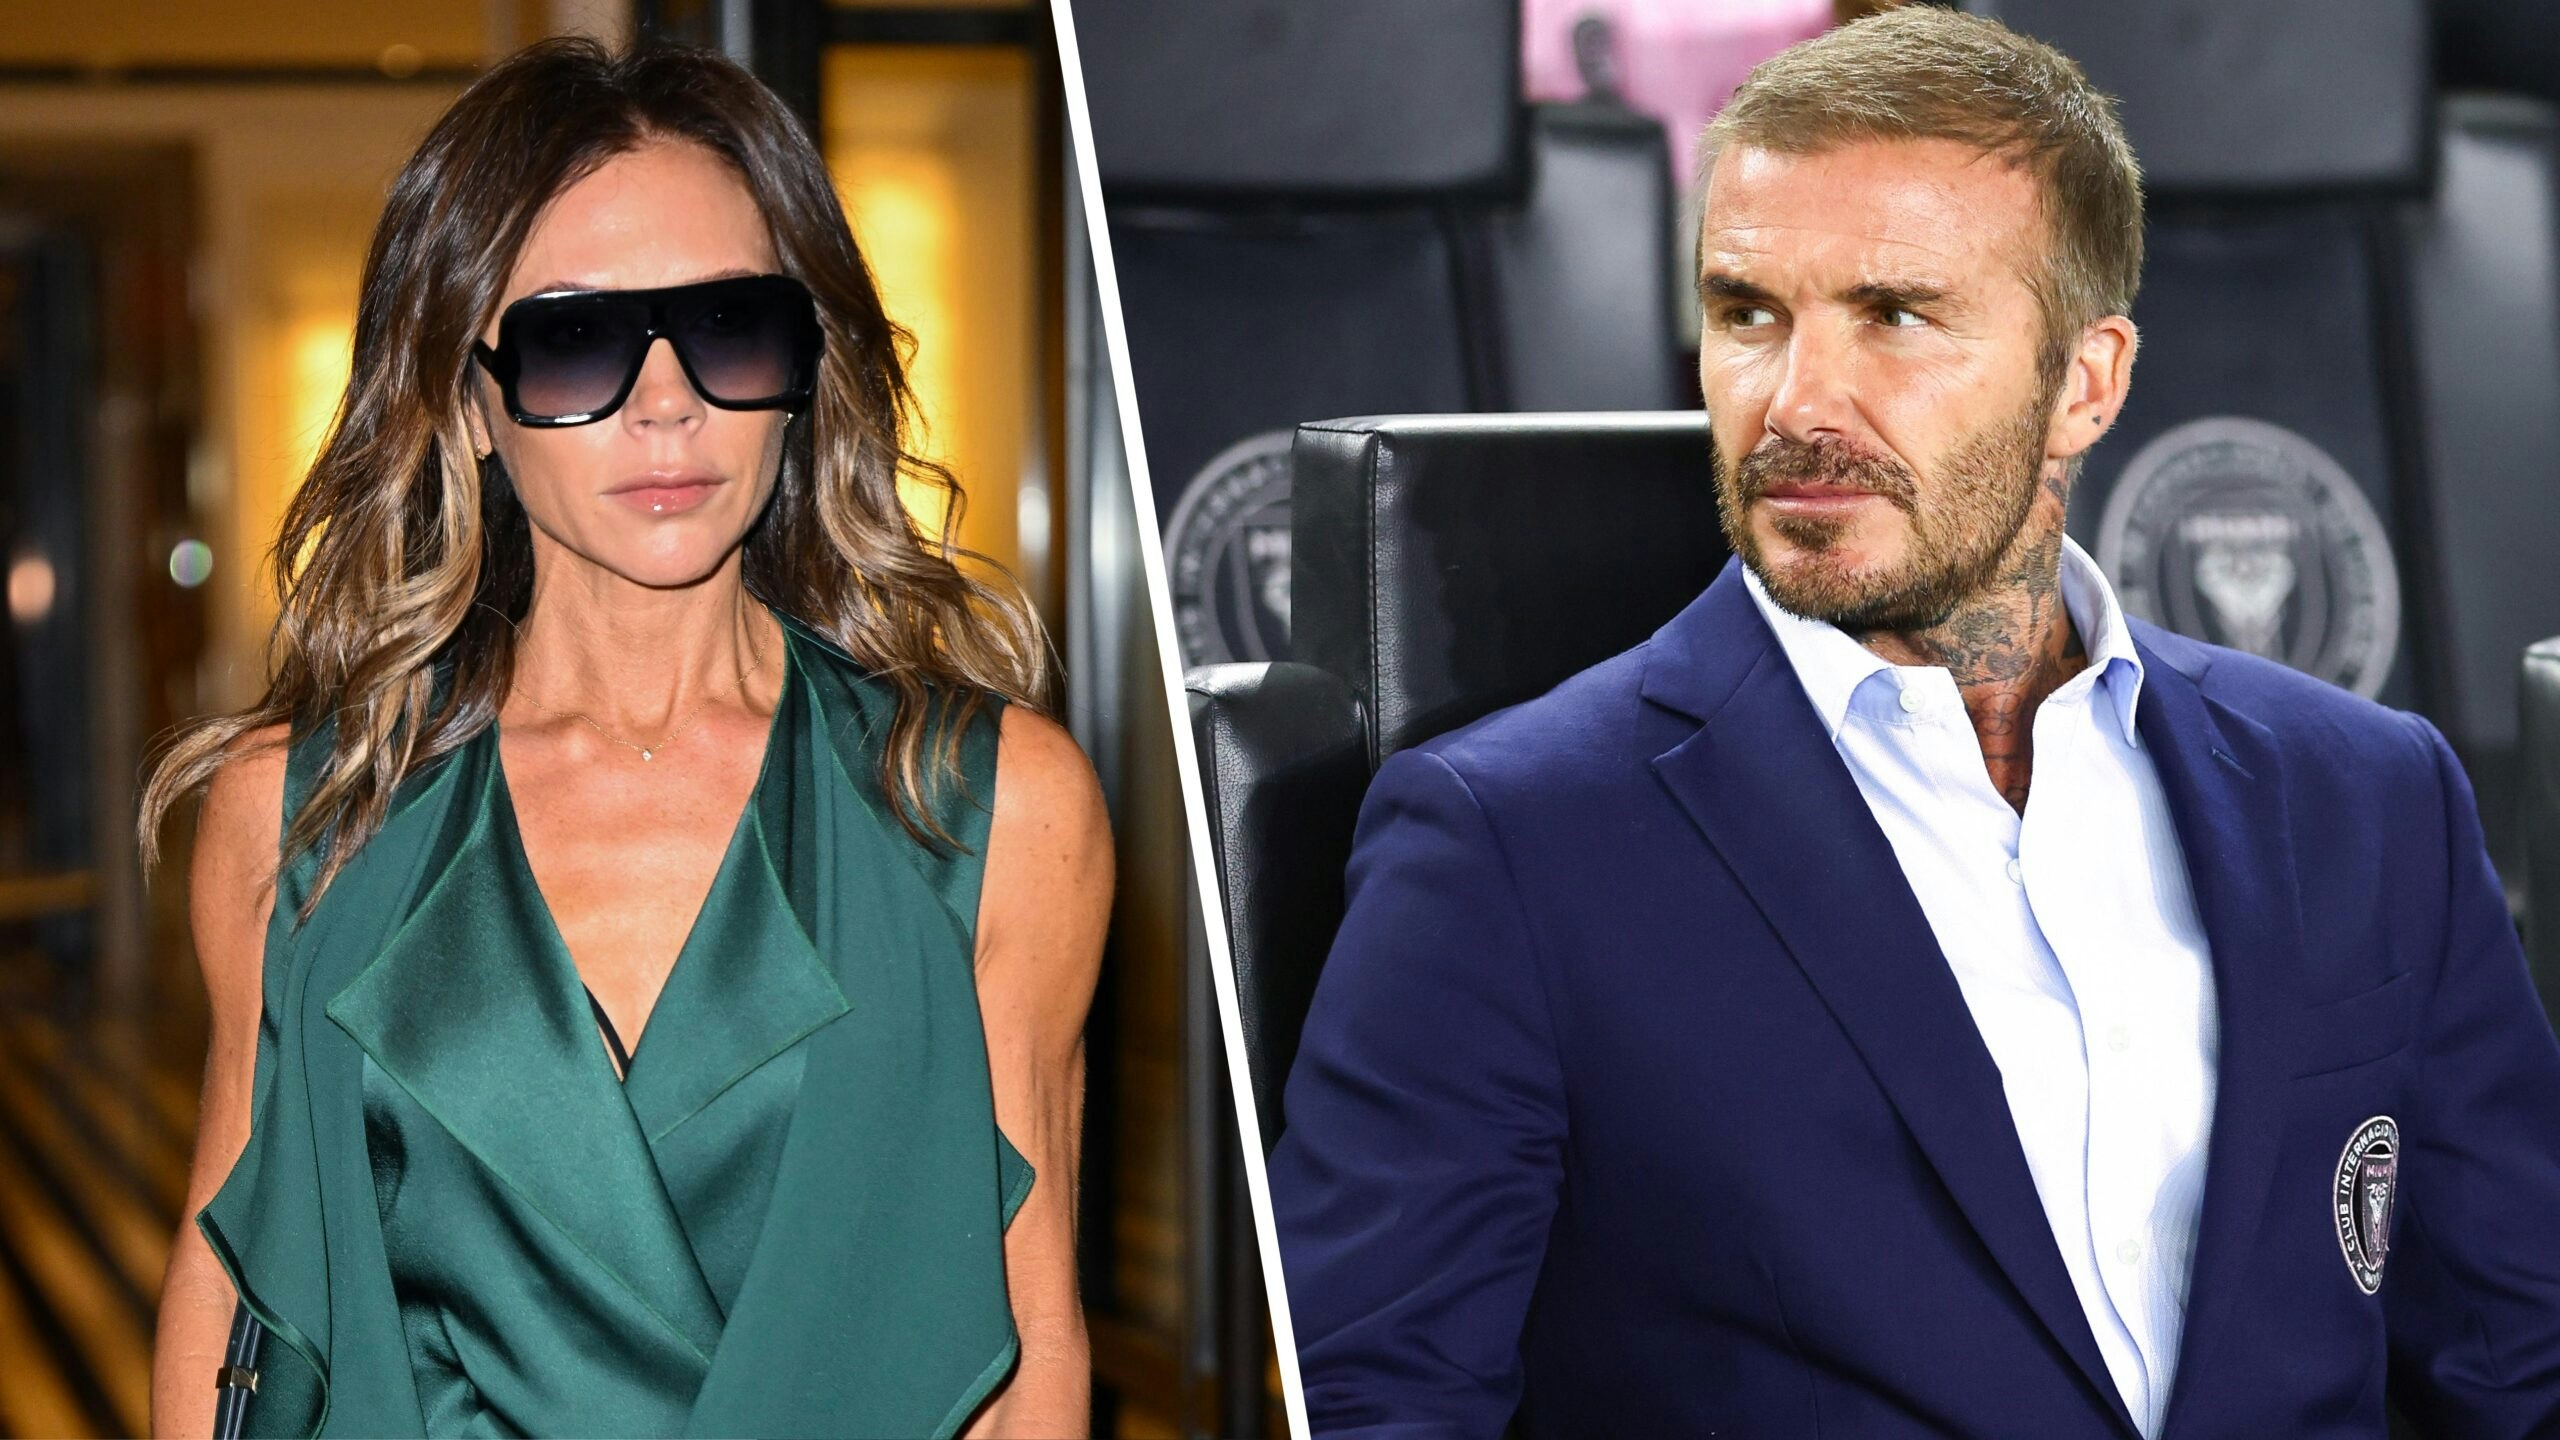 Victoria Beckham tells David: 'This is all your fault'